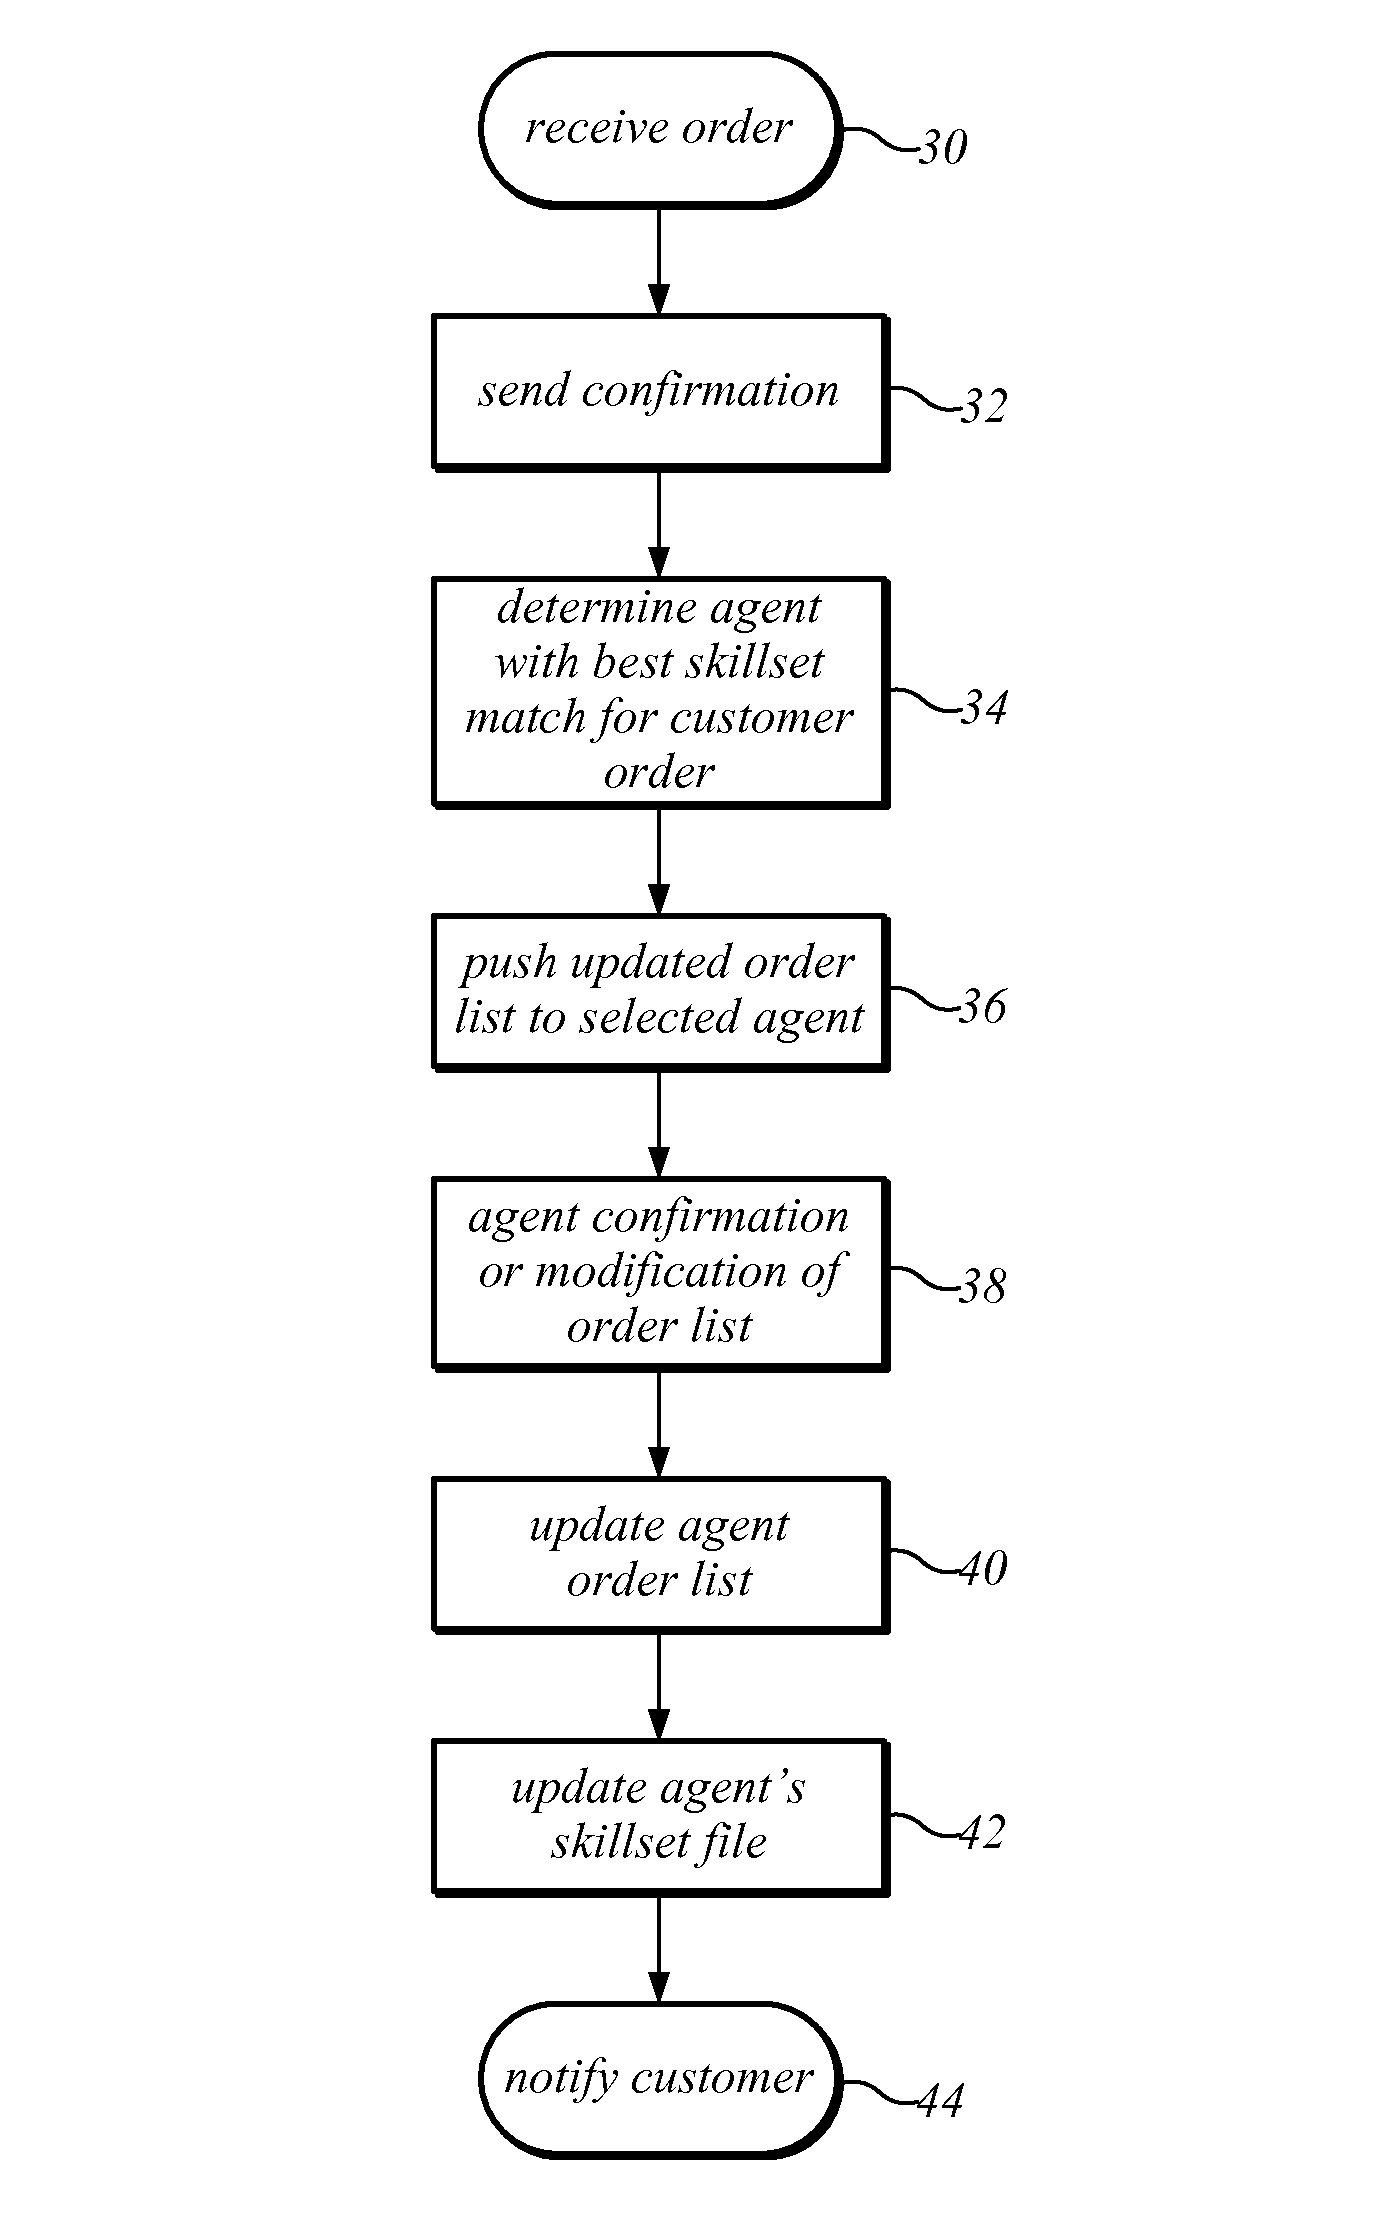 Allocation of location-based orders to mobile agents